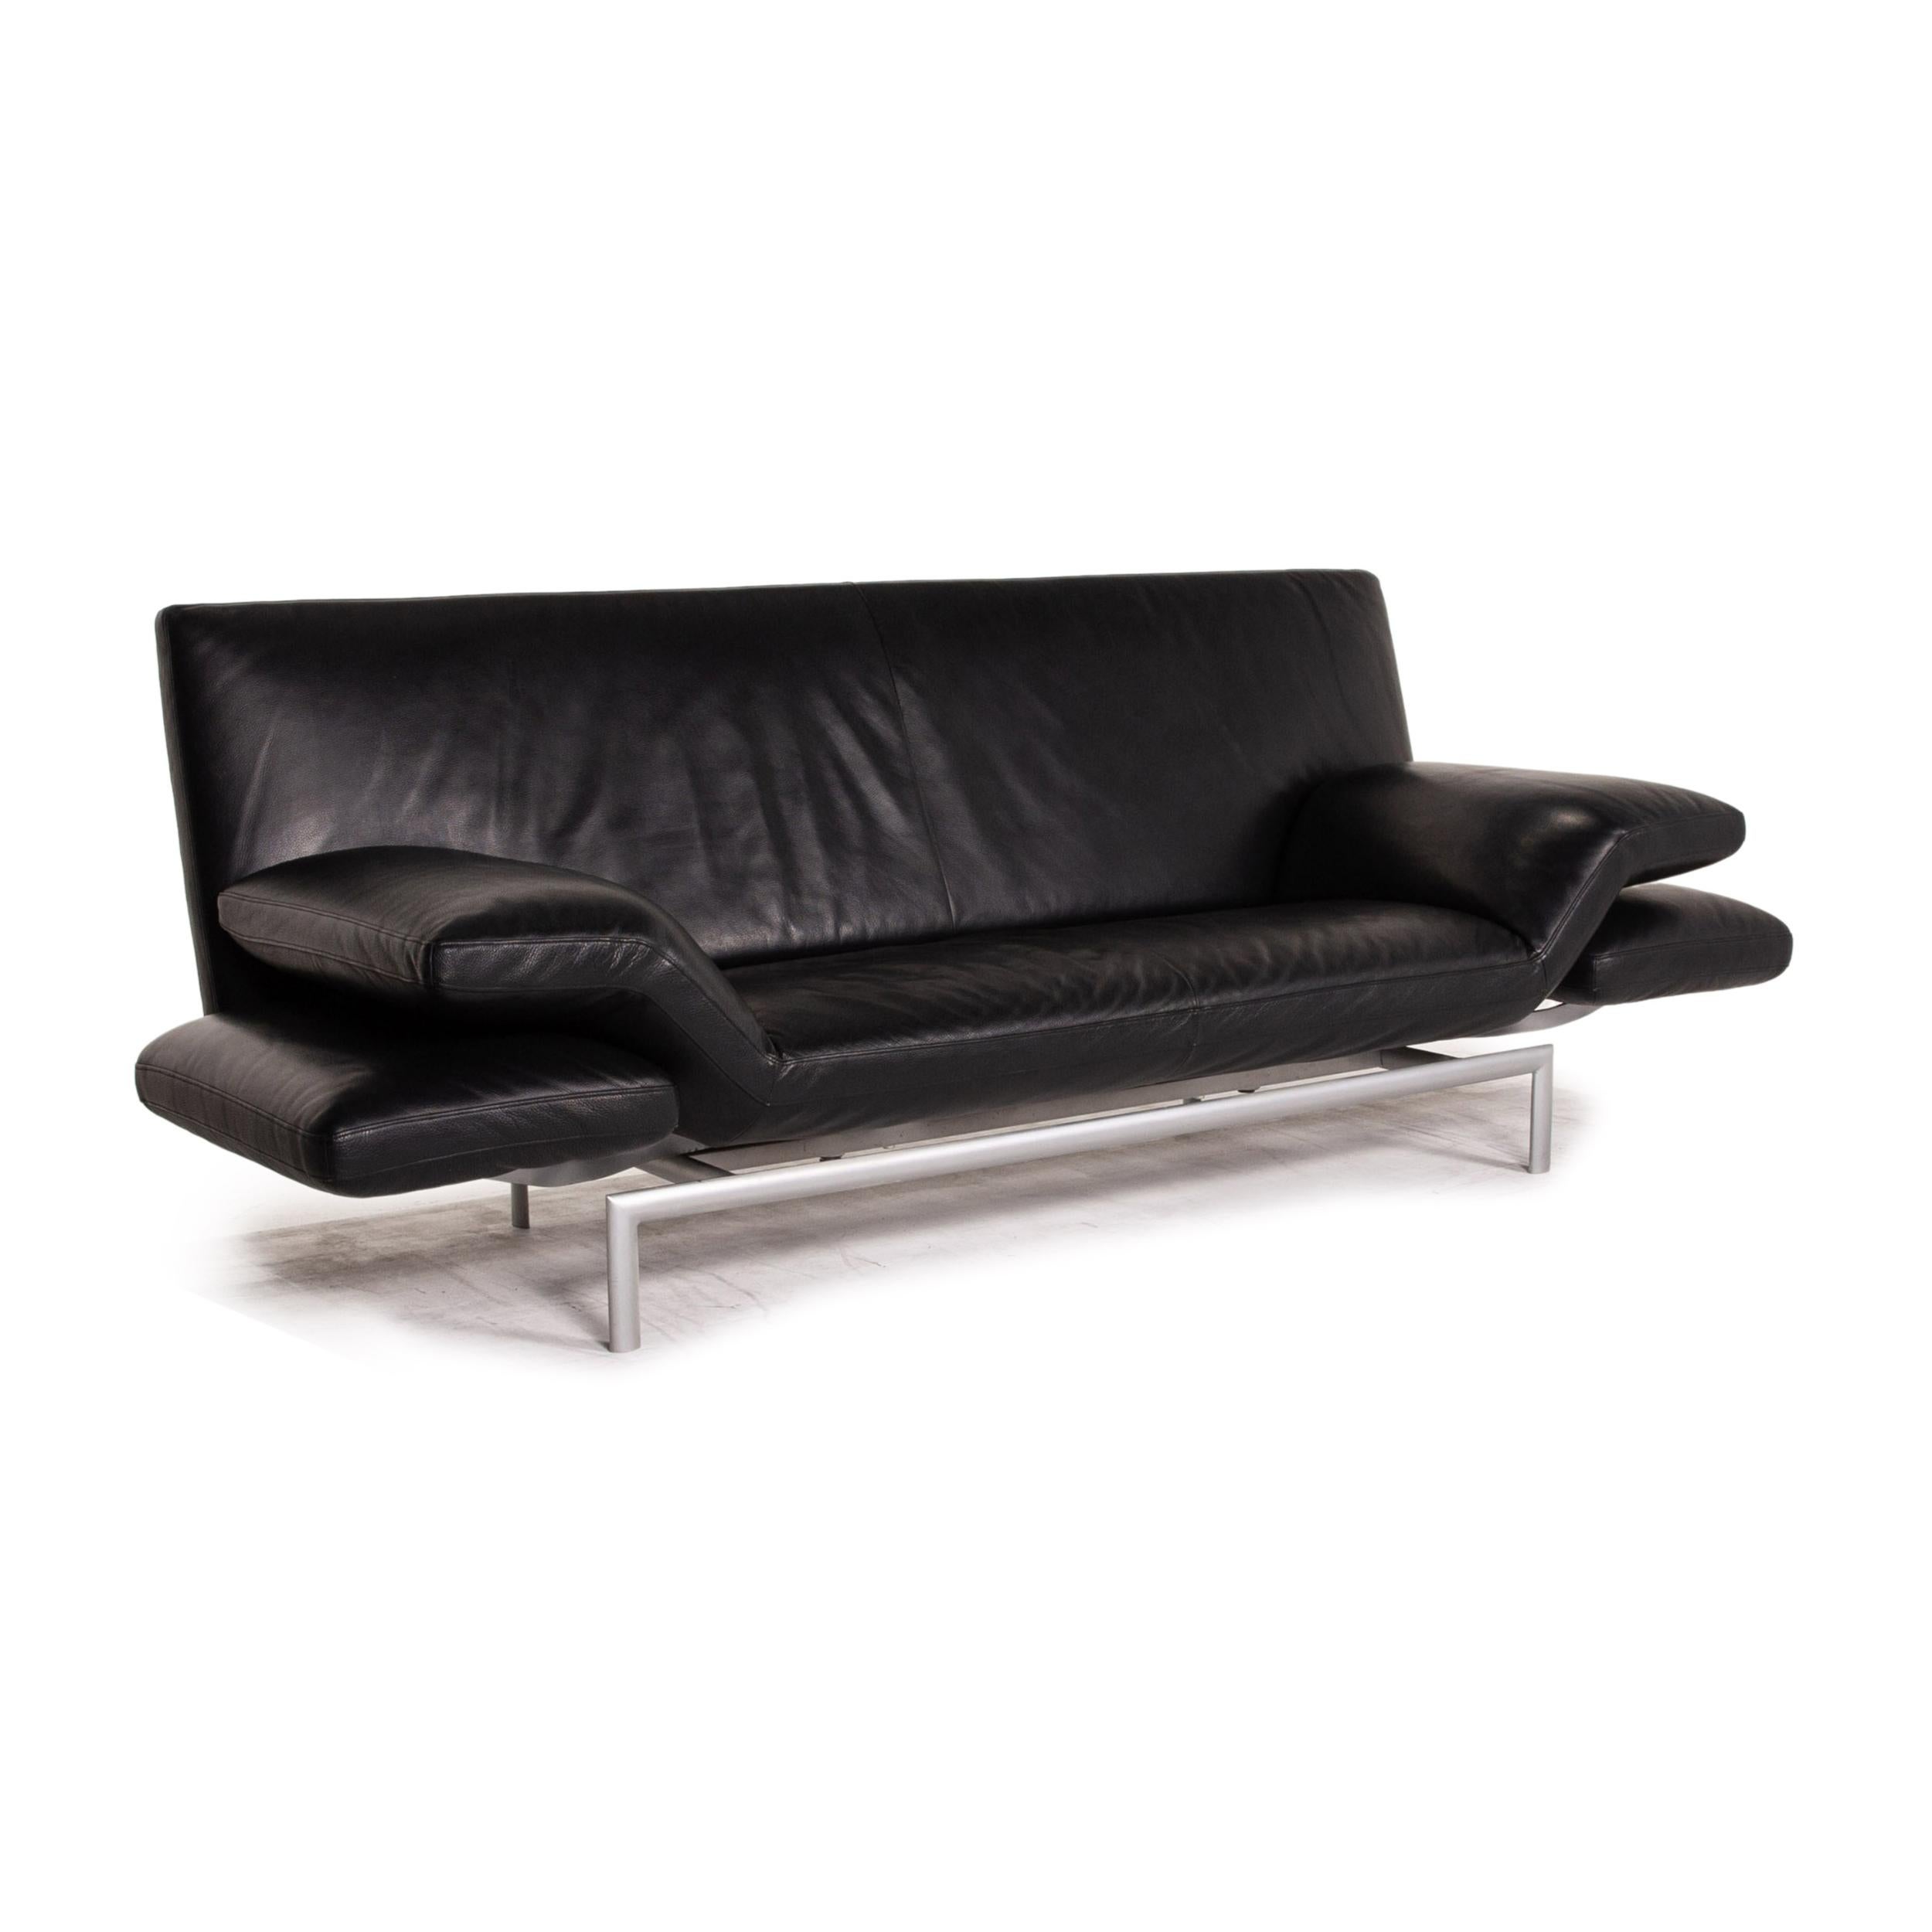 Designo Flyer Leather Sofa Black Two-Seat Function Couch 1